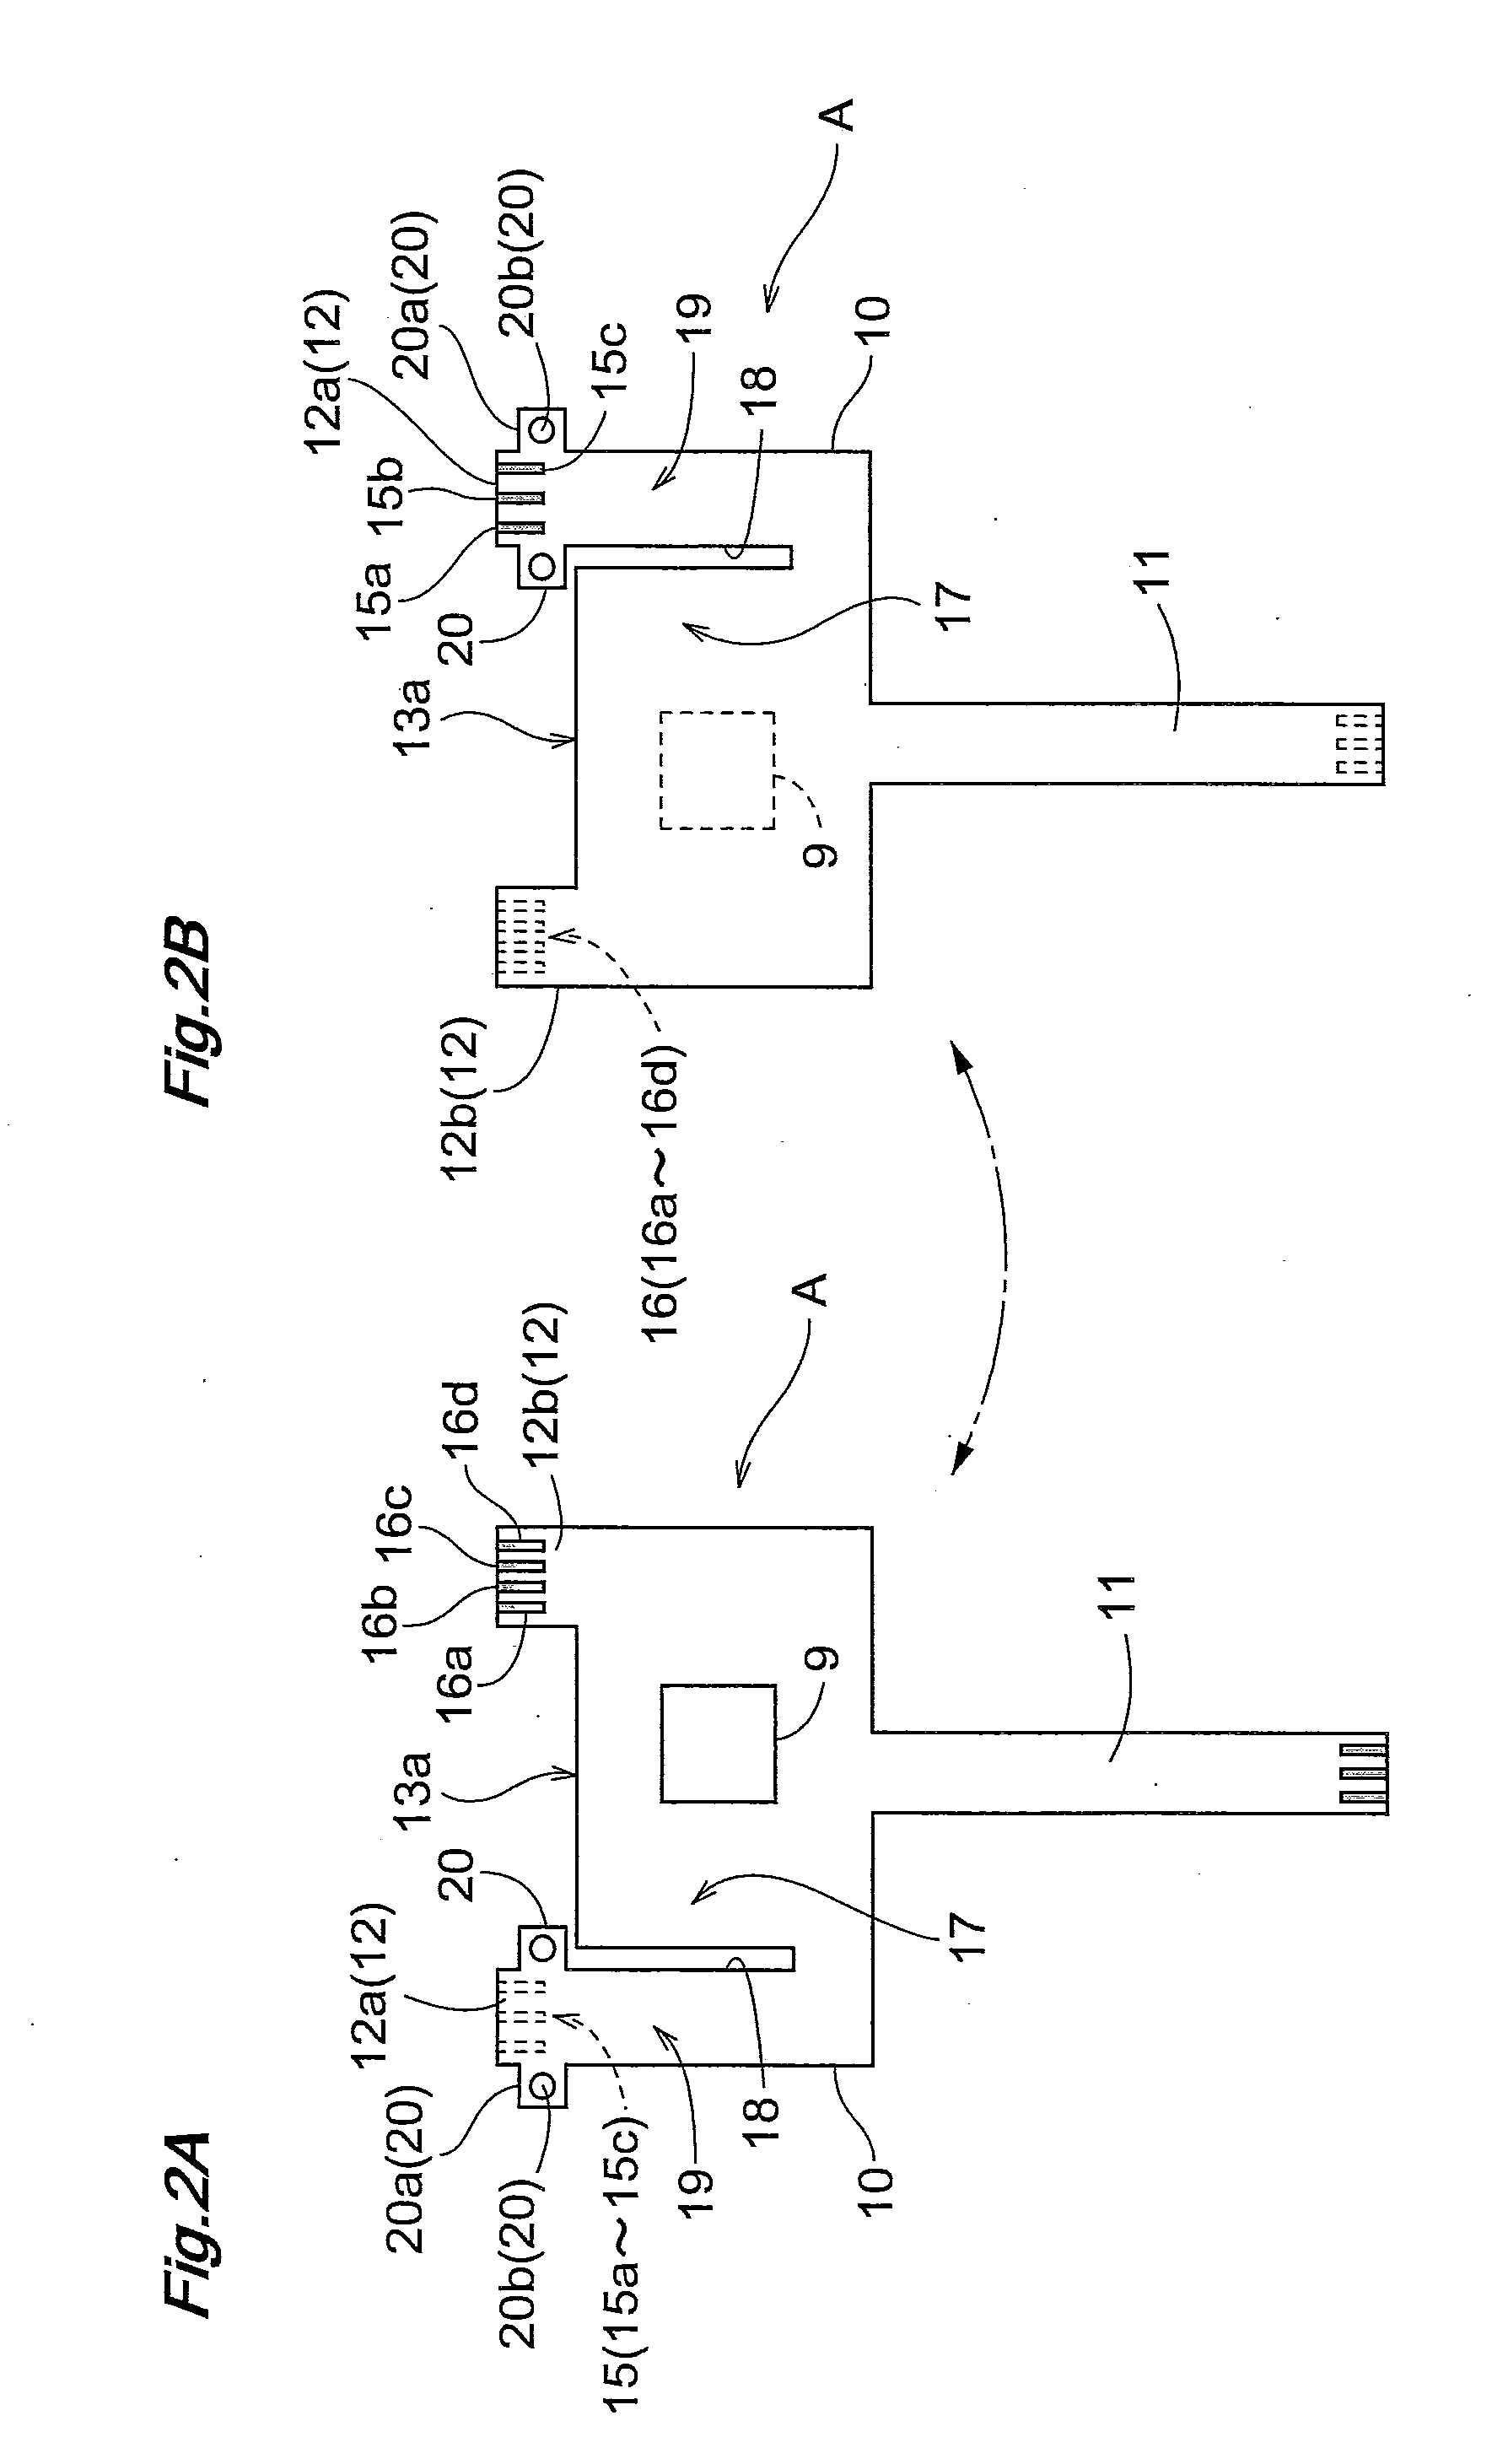 Flexible Wiring Substrate